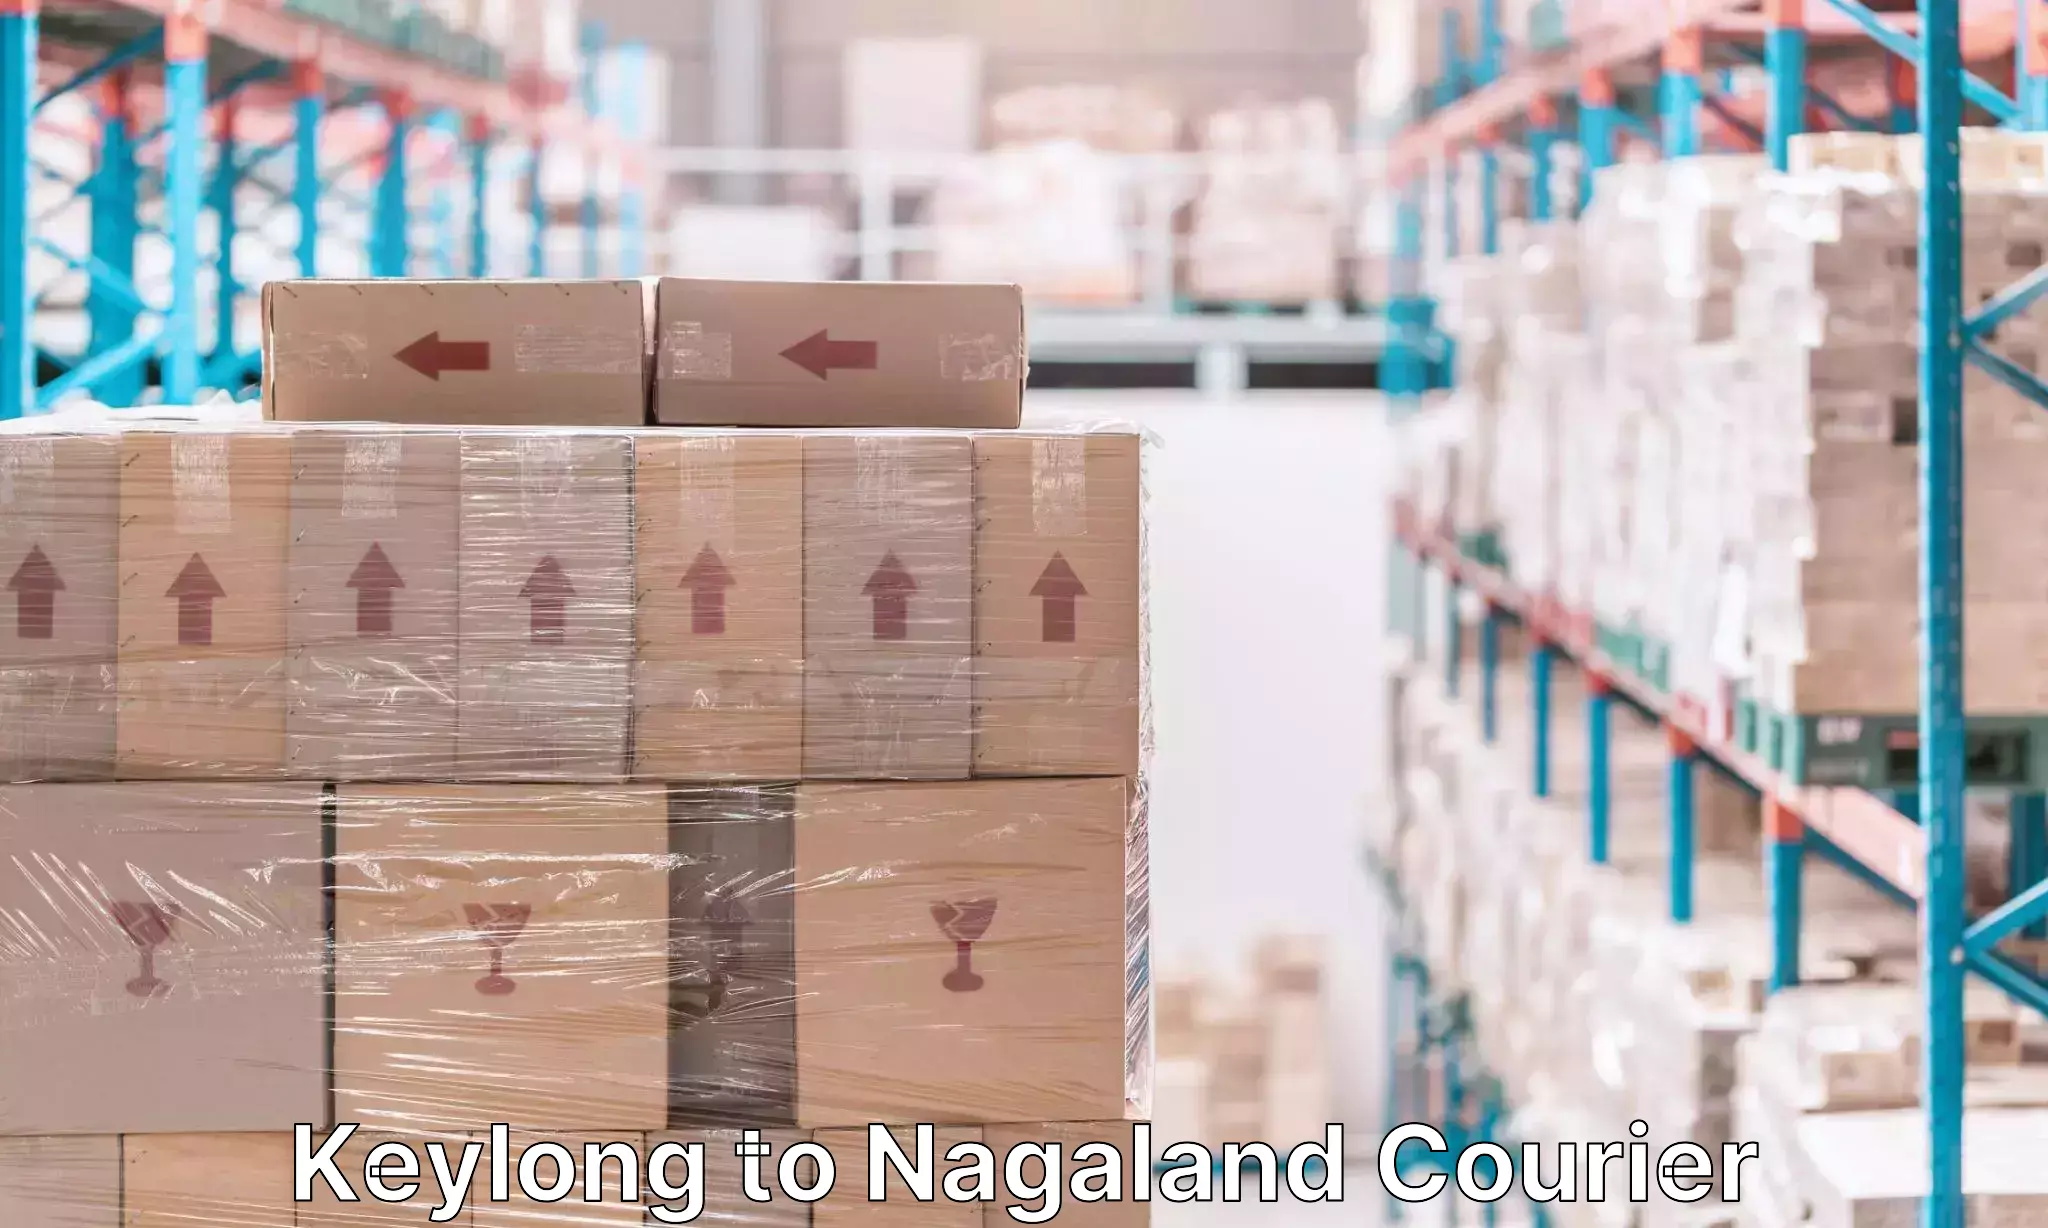 Luggage delivery system Keylong to Nagaland